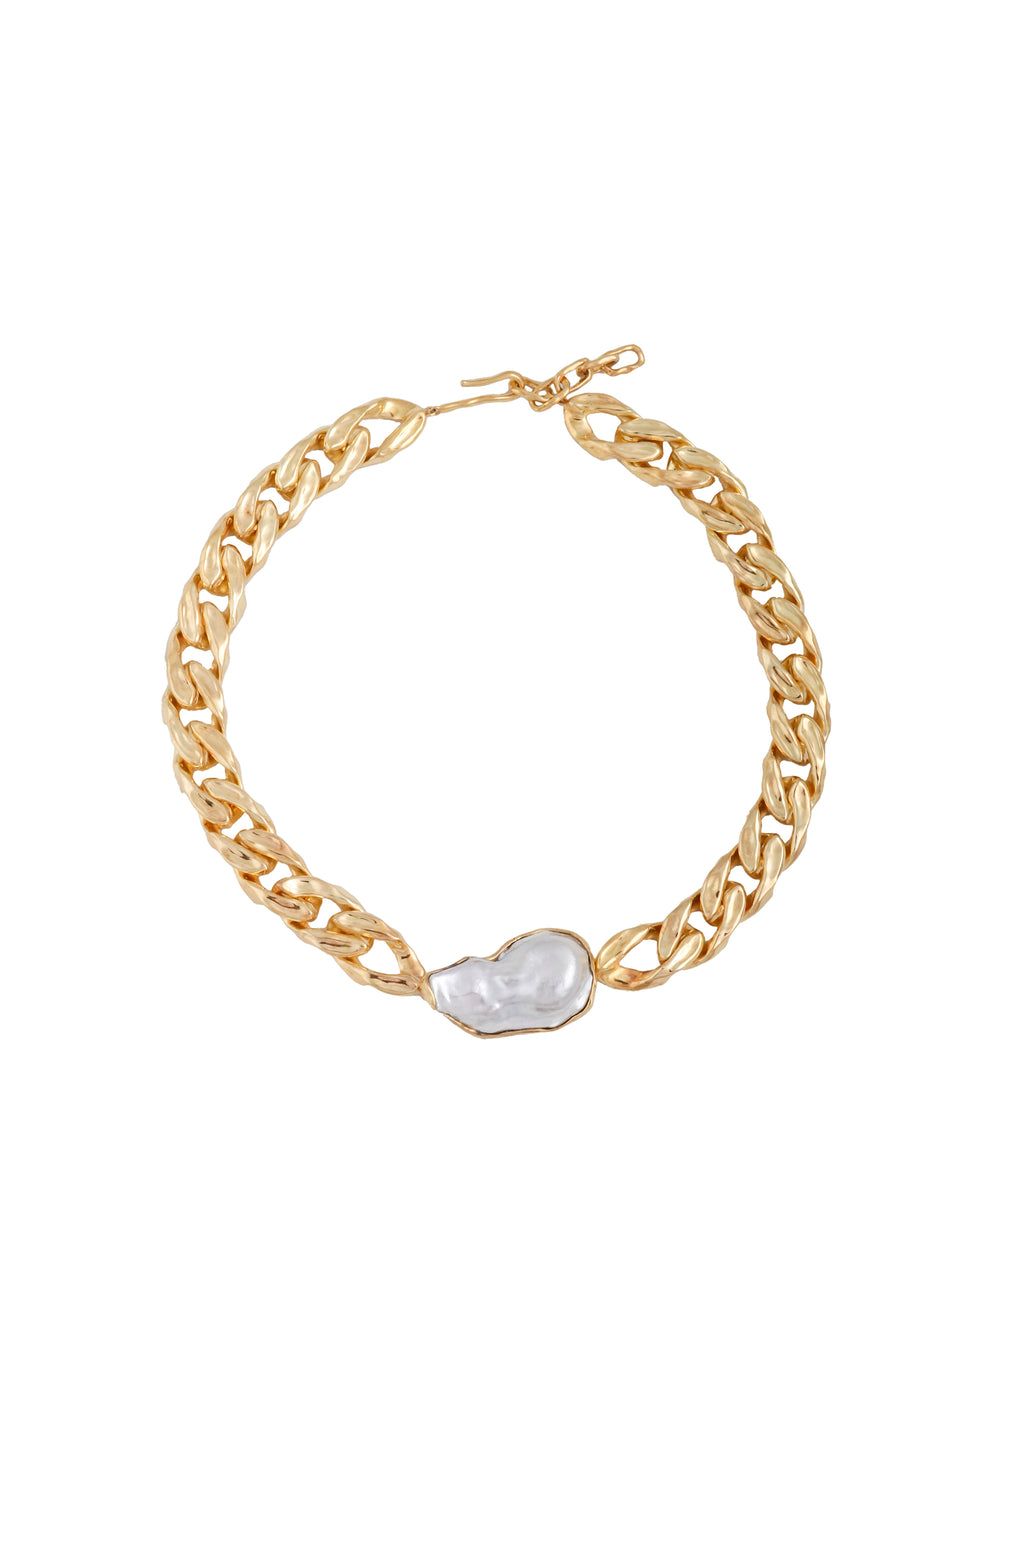 STATEMENT WAVE CHAIN NECKLACE WITH CULTURED PEARL